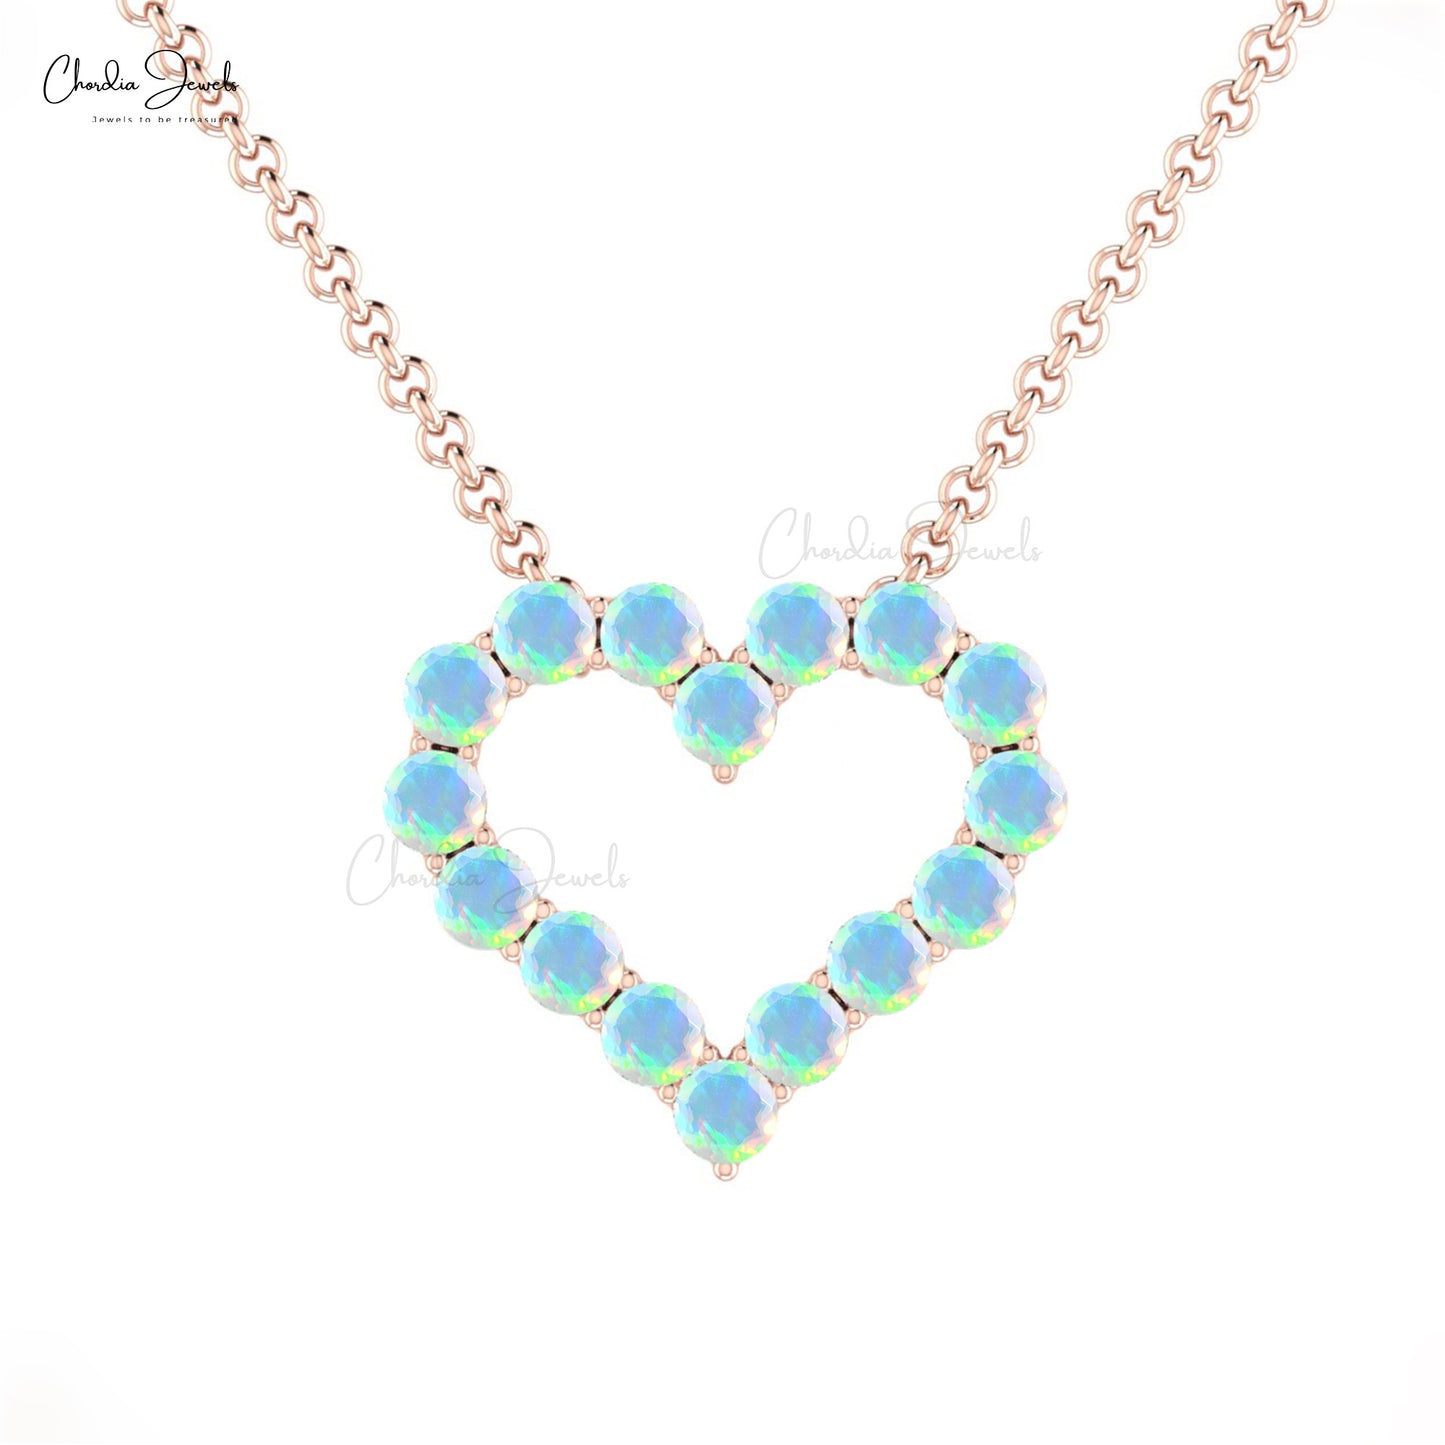 Hot selling Exquisite Open Heart Shape Necklace Pendant Natural Ethiopian Fire Opal Beaded Necklace 14k Solid Gold Jewelry For Birthday Gift